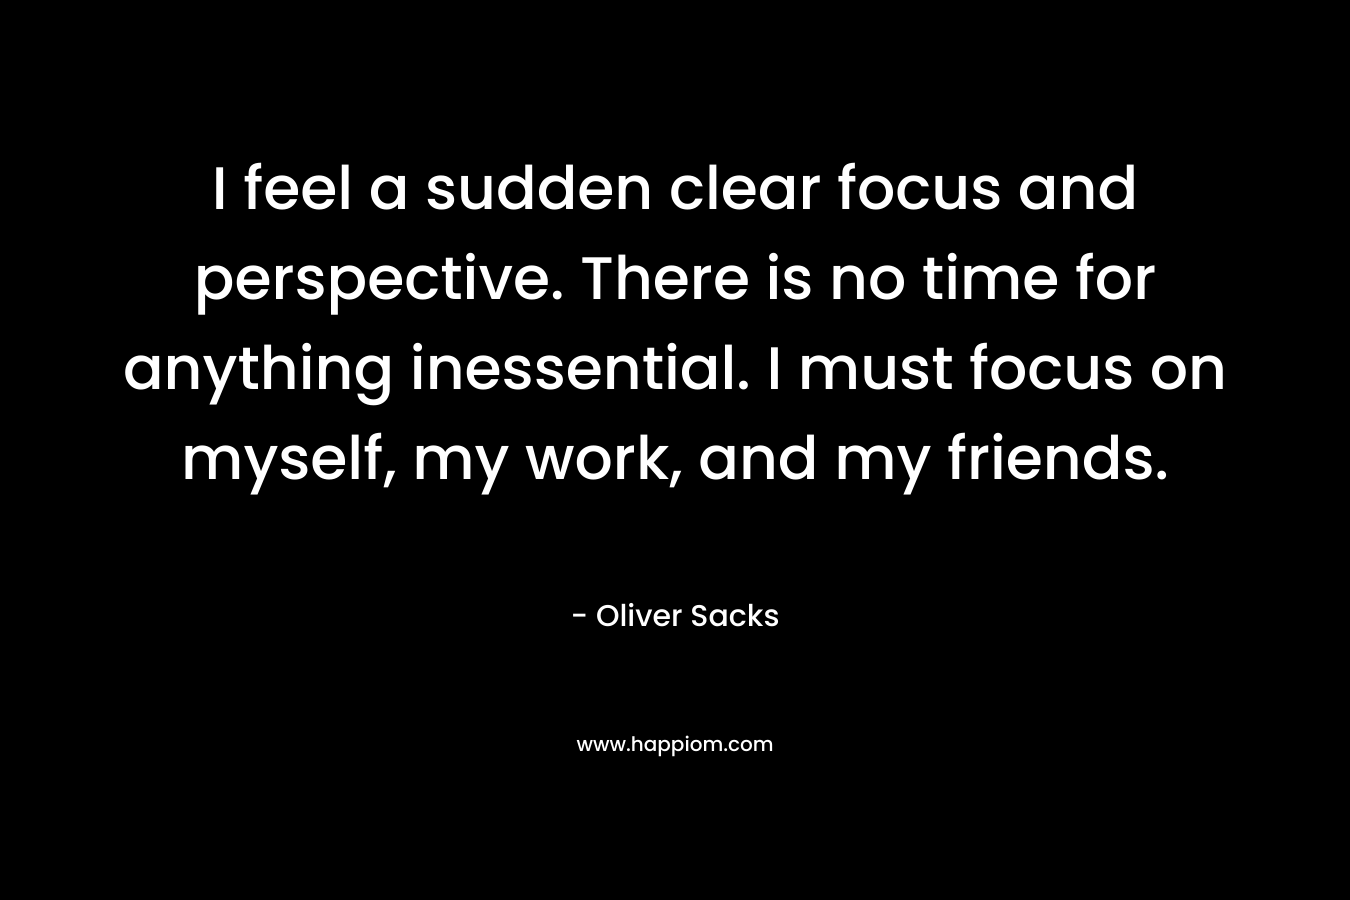 I feel a sudden clear focus and perspective. There is no time for anything inessential. I must focus on myself, my work, and my friends.